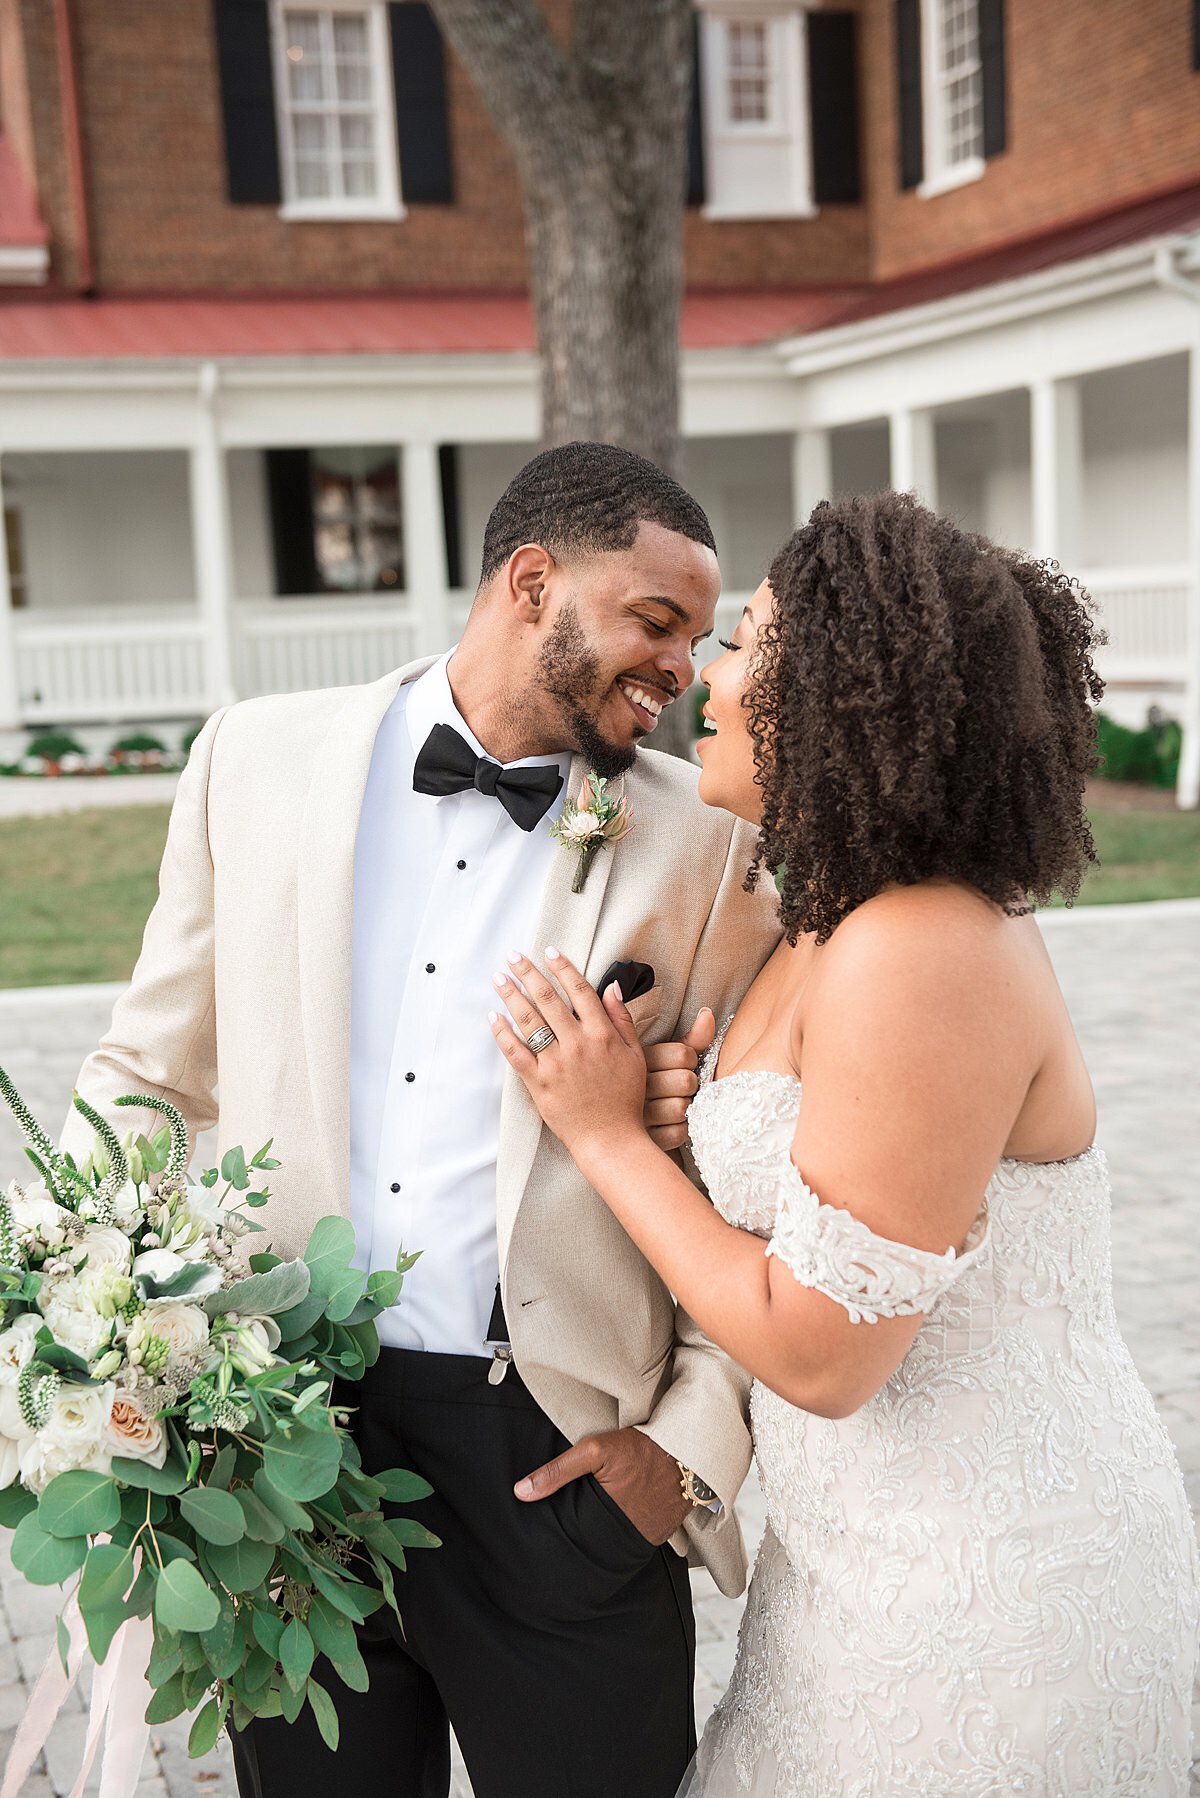 The groom, Alex Sweet, wearing a black and white tuxedo holding the bridal bouquet of greenery, white, ivory and blush flowers touches noses with his wife, Jasmine Sweet who is wearing an off the shoulder lace mermaid dress while standing outside in the courtyard behind Ravenswood Mansion